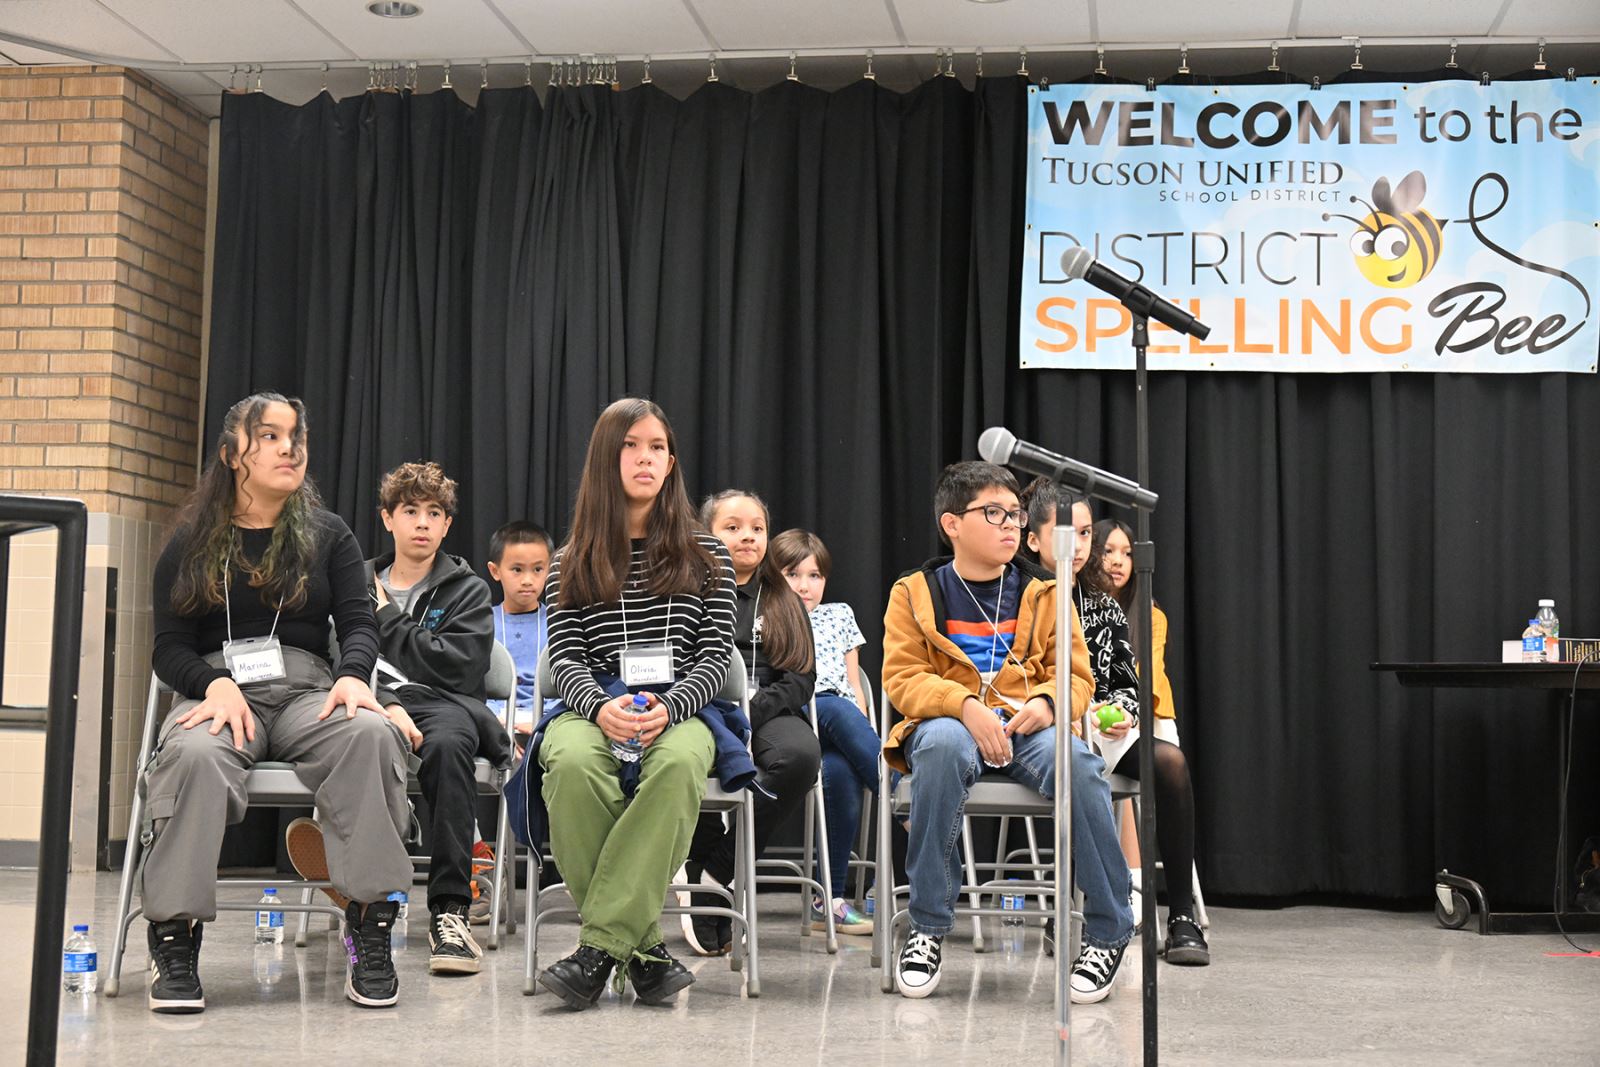 Spelling bee participants